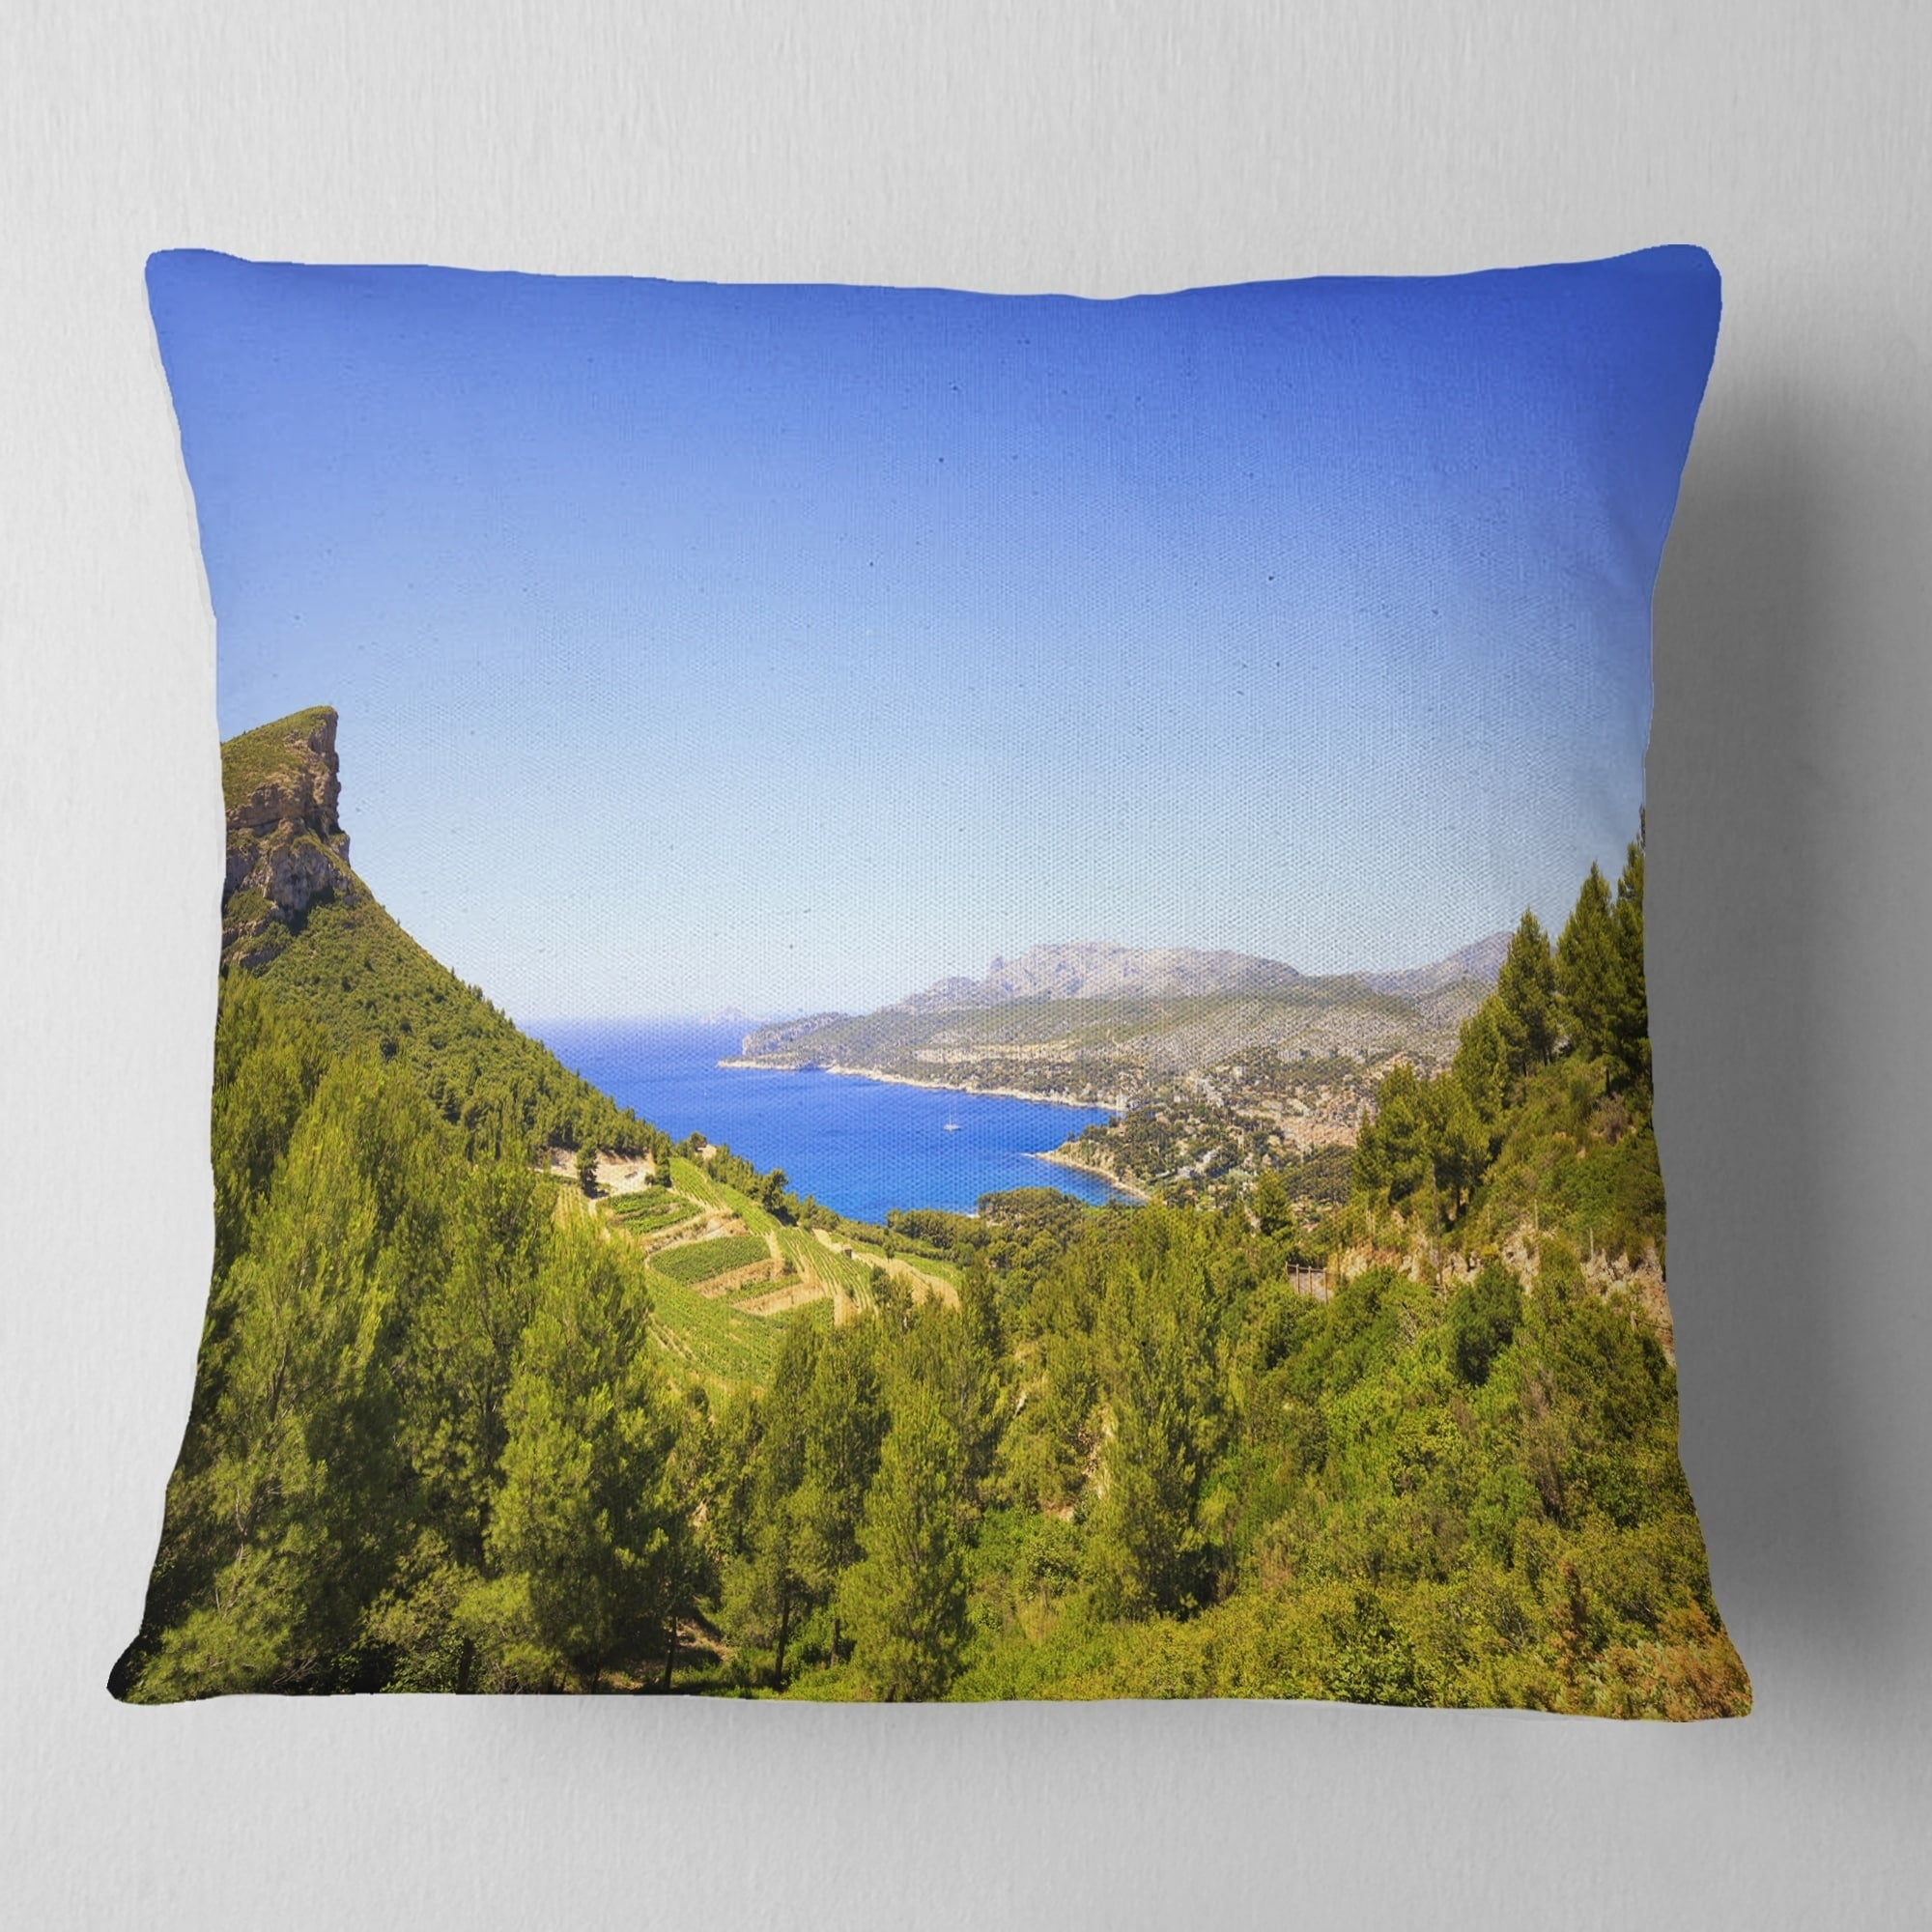 Sofa Throw Pillow 16 x 16 Designart CU11380-16-16 Cassis Bay from Route des Cretes Landscape Wall Cushion Cover for Living Room 